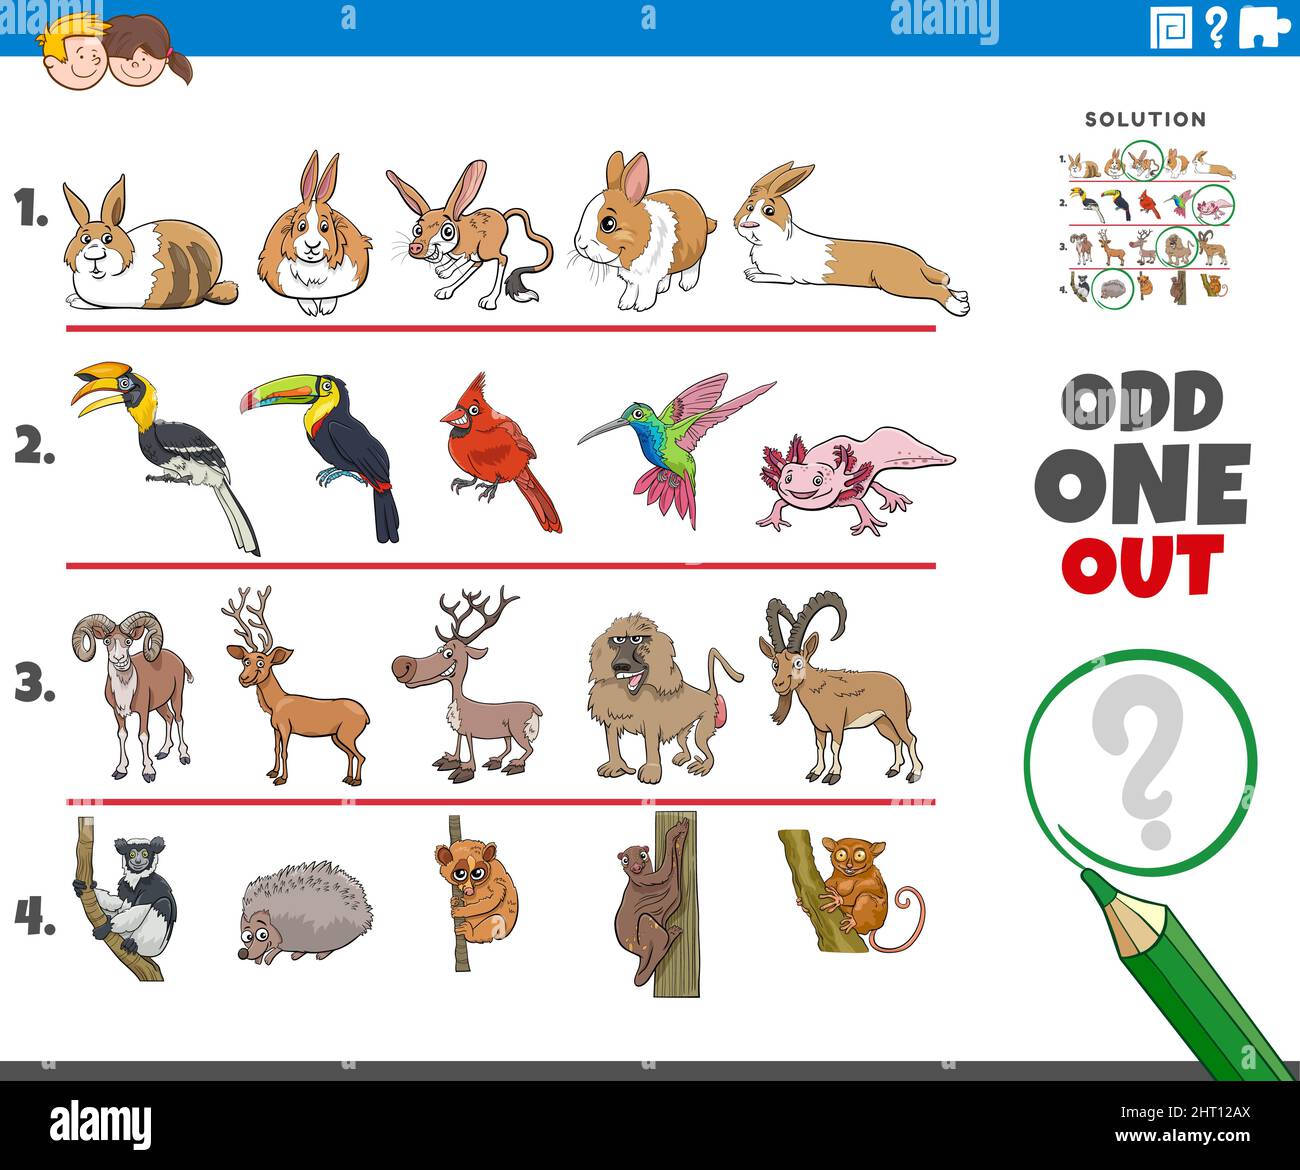 Cartoon illustration of odd one out picture in a row educational task for children with comic animal characters Stock Vector